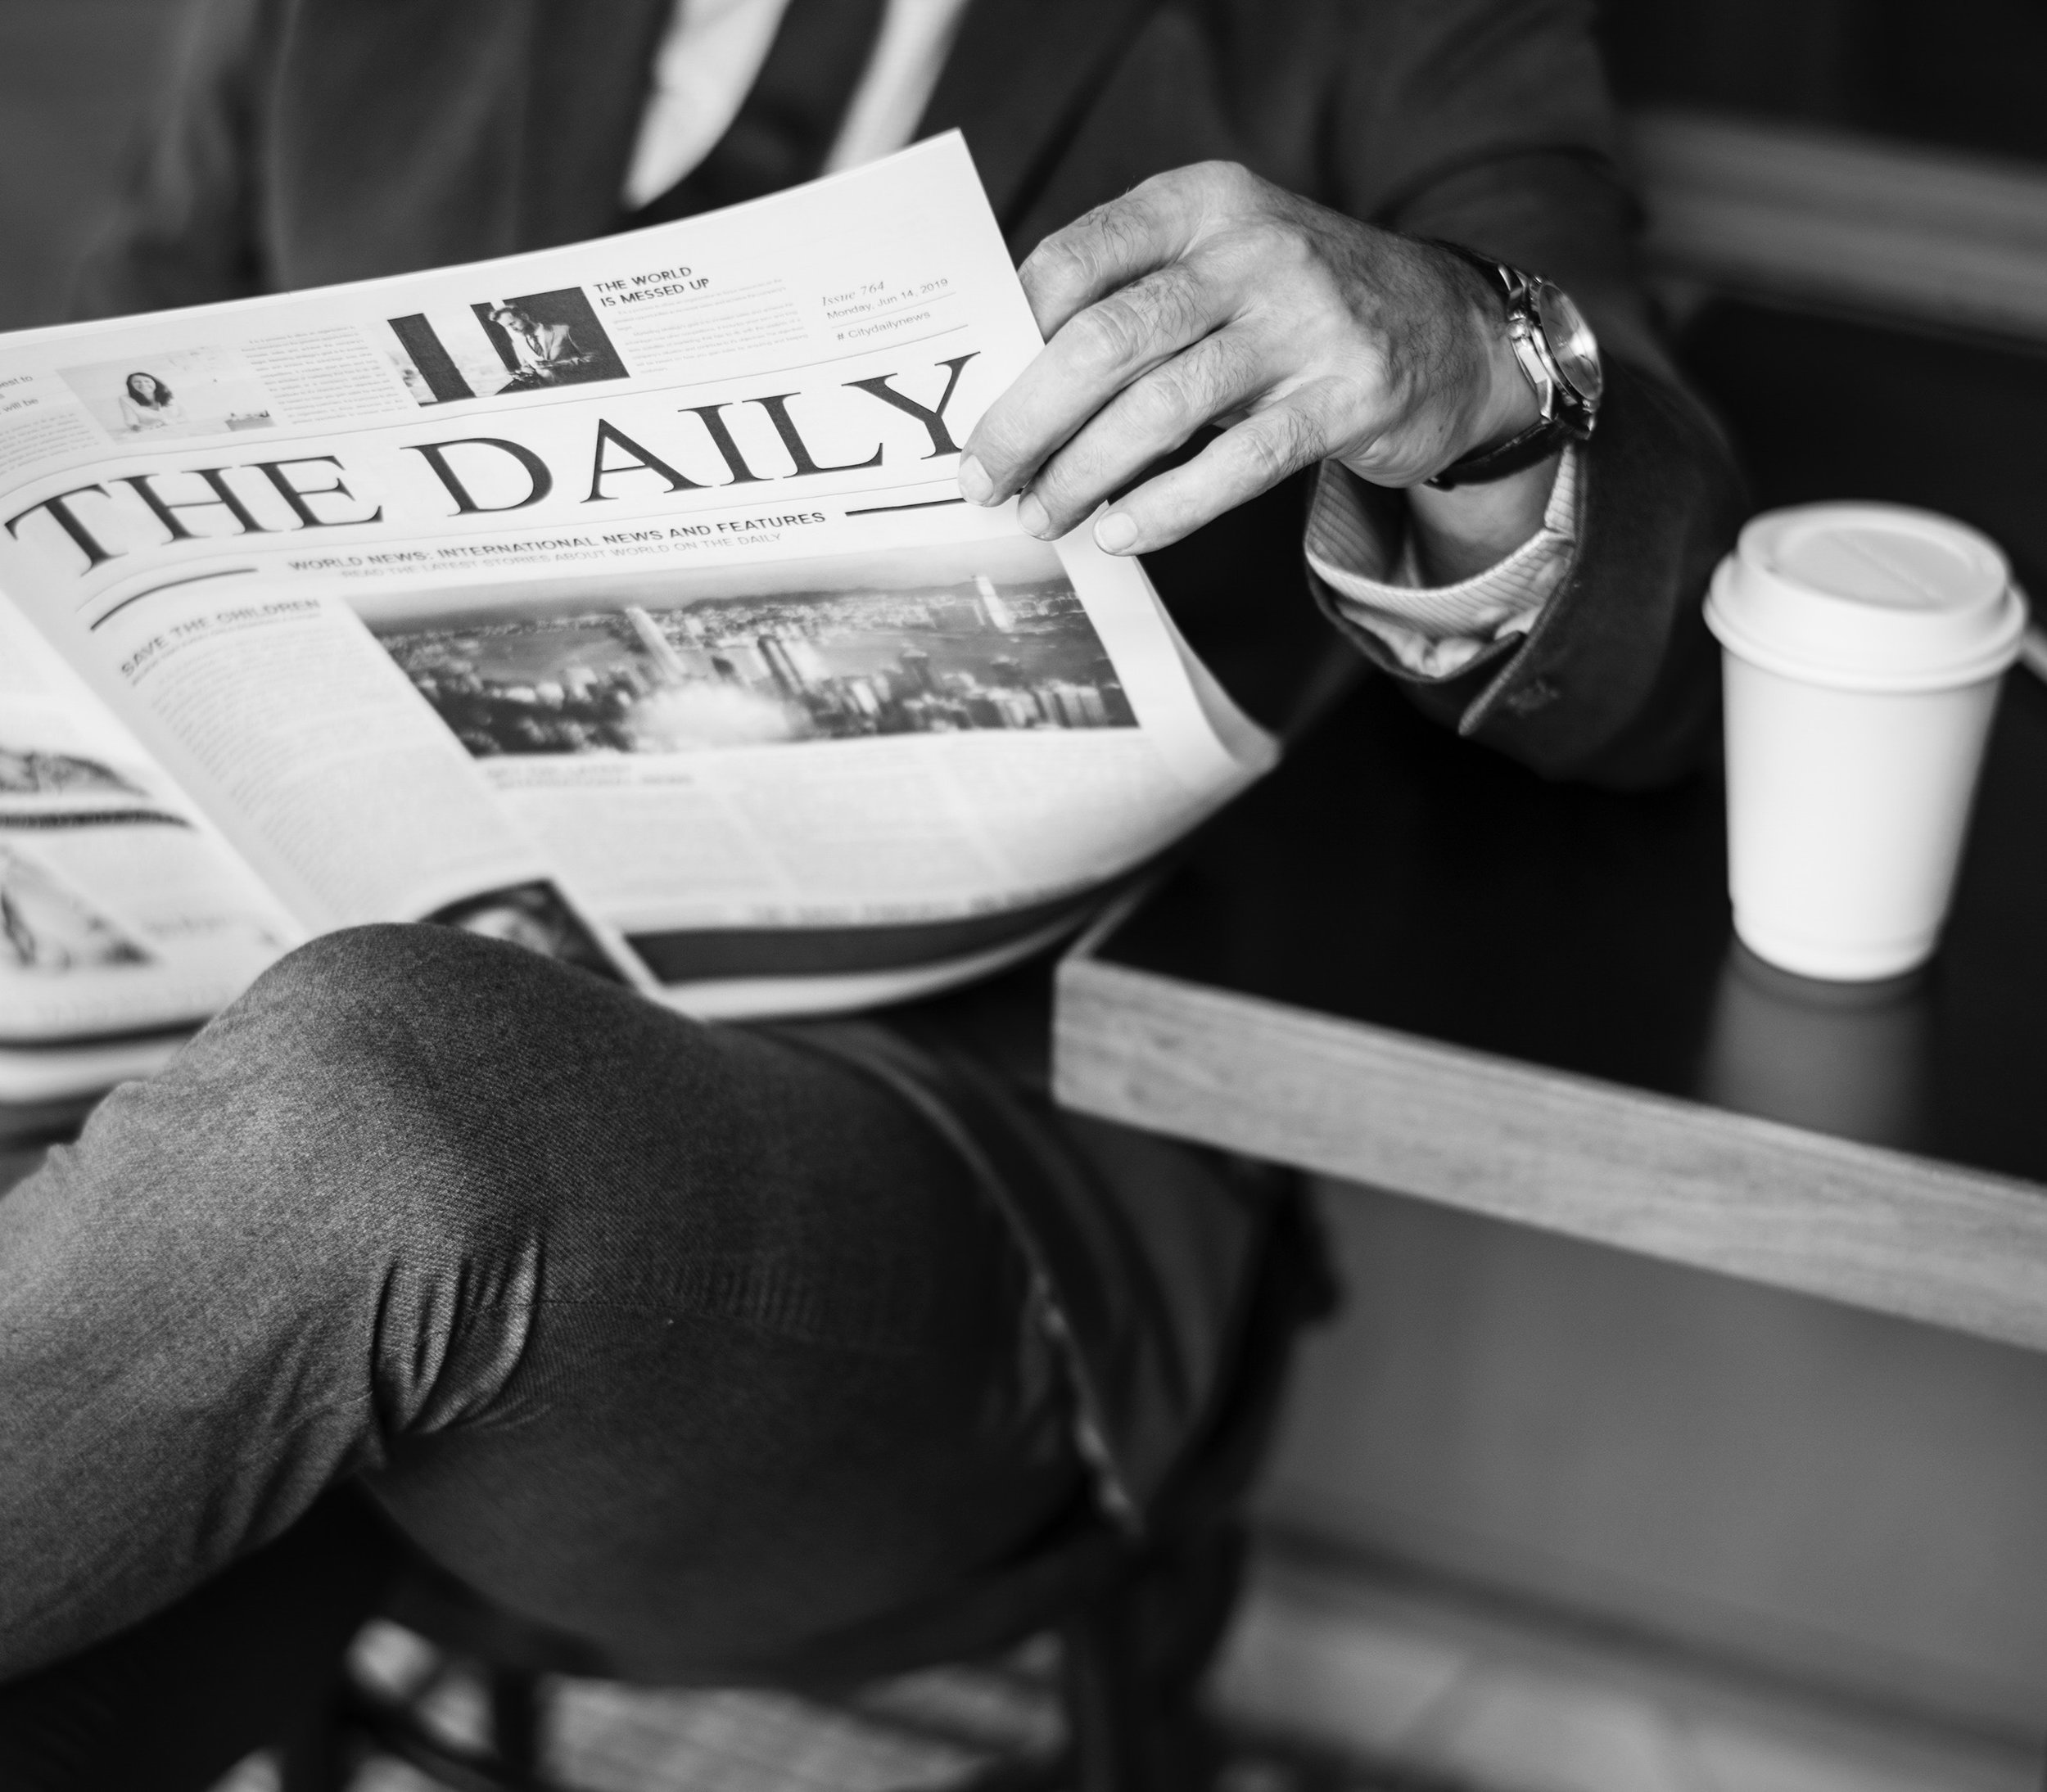 A man sits on a bench reading a newspaper, with a takeaway coffee cup on the table next to him.